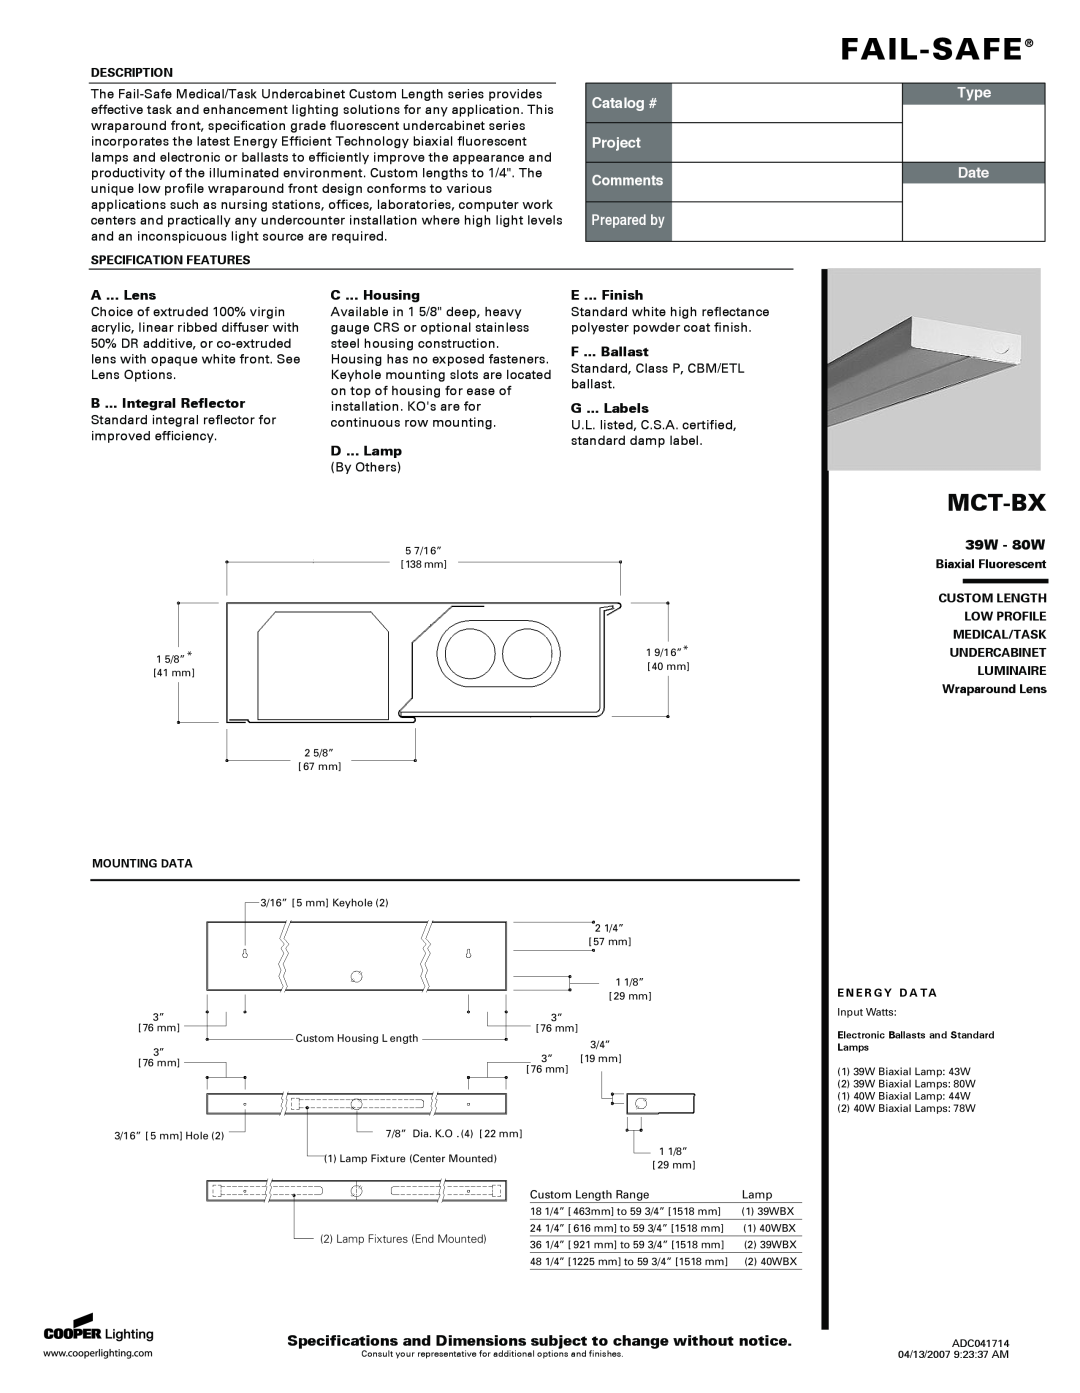 Cooper Lighting MCT-BX specifications 39W - 80W, Fail-Safe, Mct-Bx, Catalog #, Project Comments, Prepared by, Type, Date 